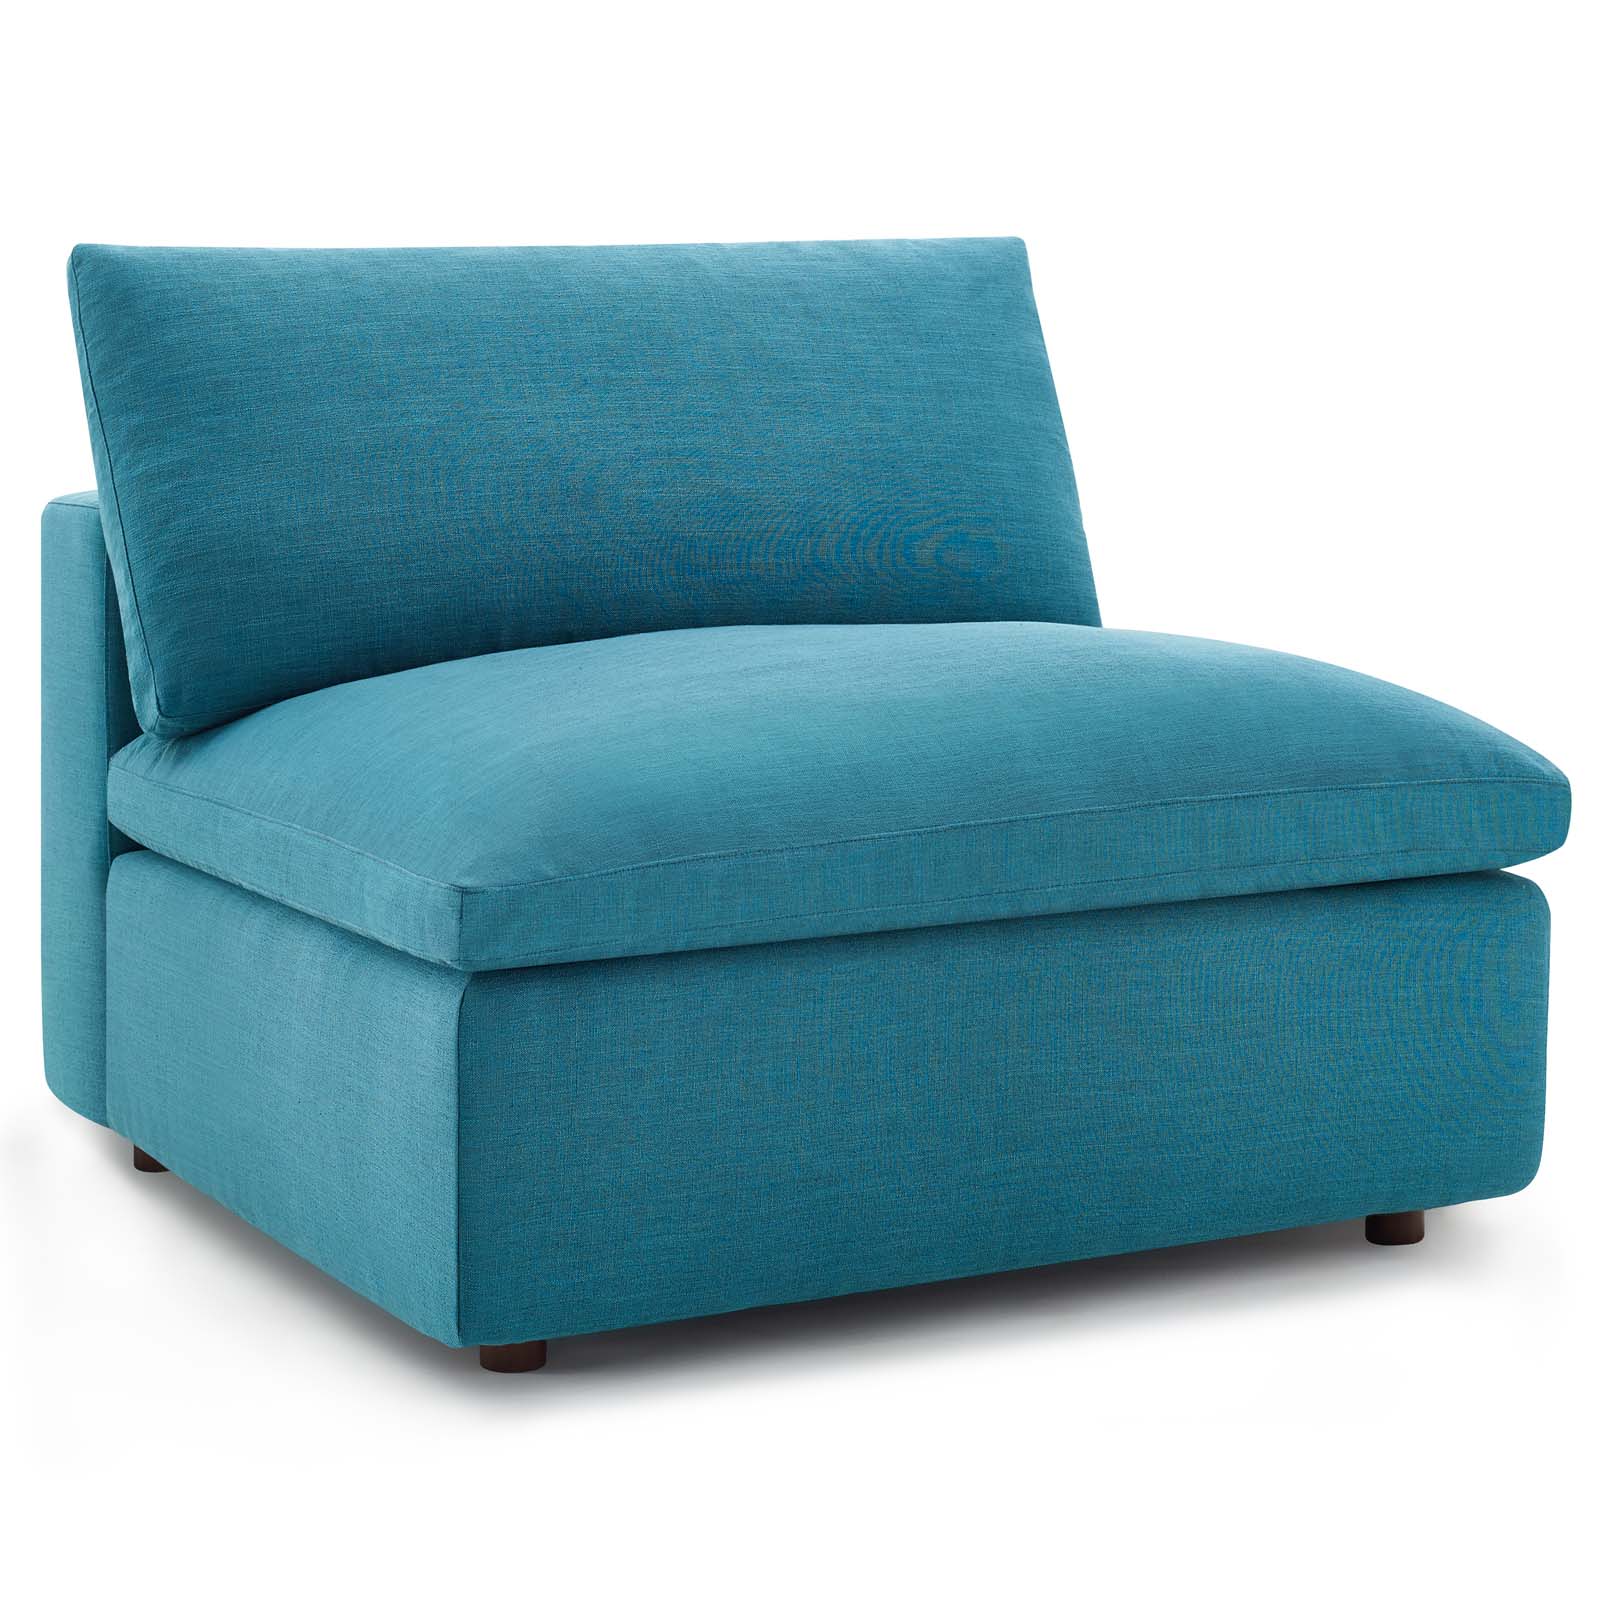 Modway Commix 4-Piece Fabric Down Filled Sectional Sofa Set in Teal - image 5 of 10